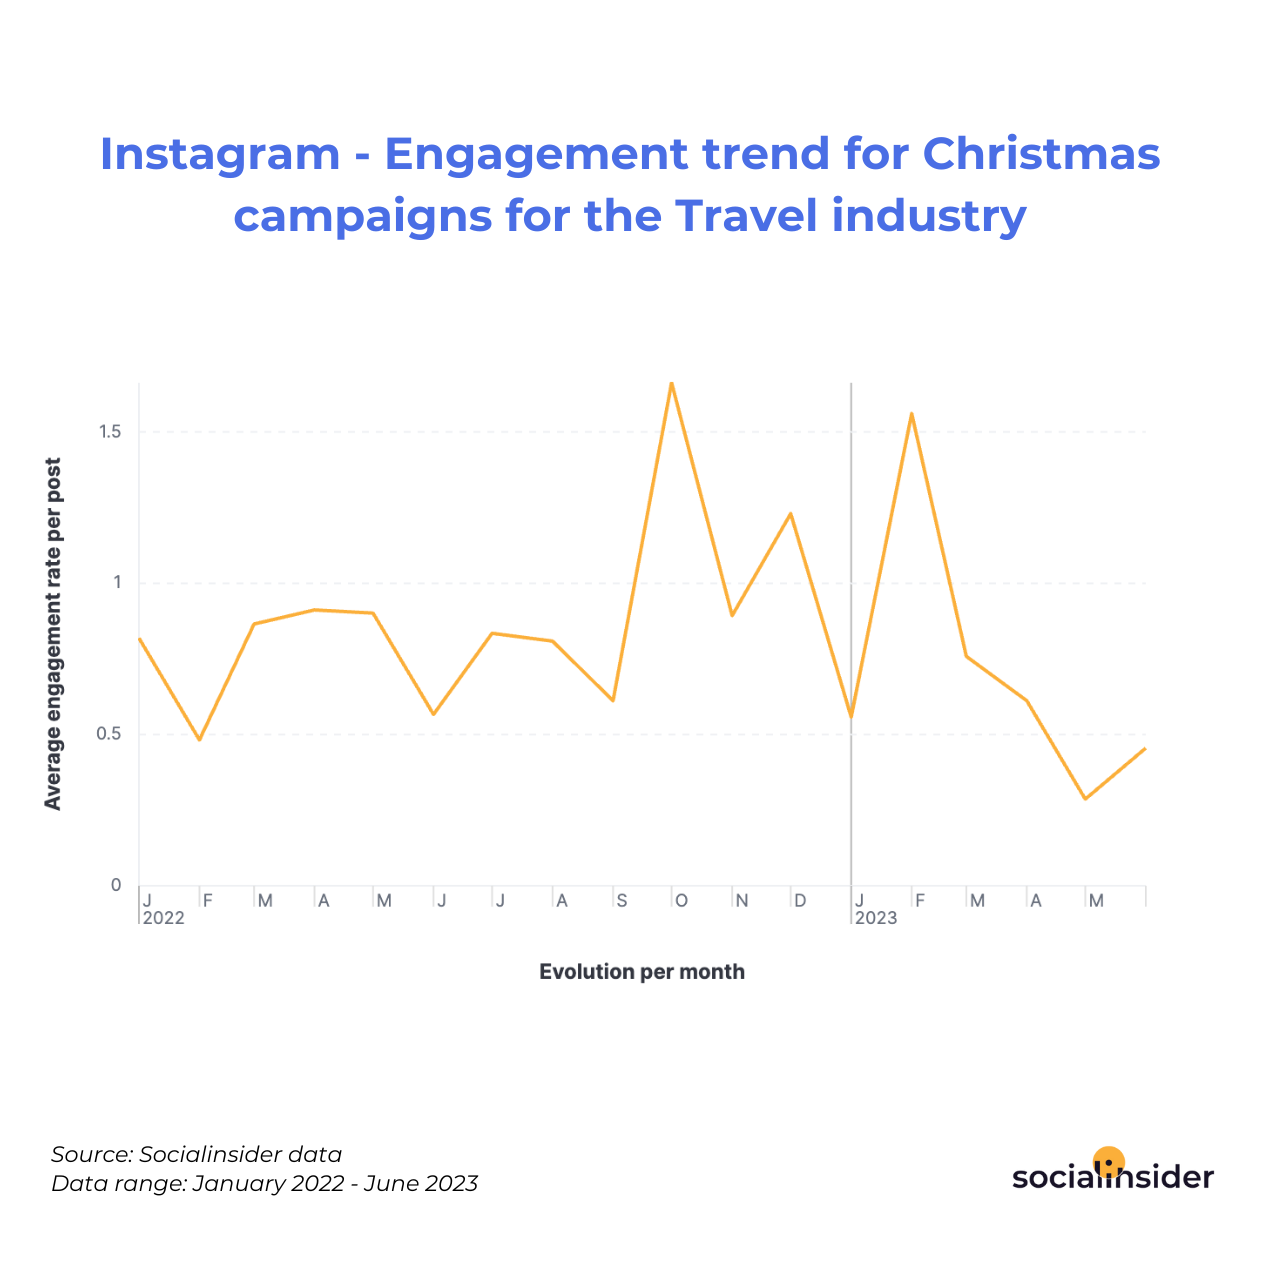 Instagram - Engagement trend for Christmas campaigns for the Travel industry